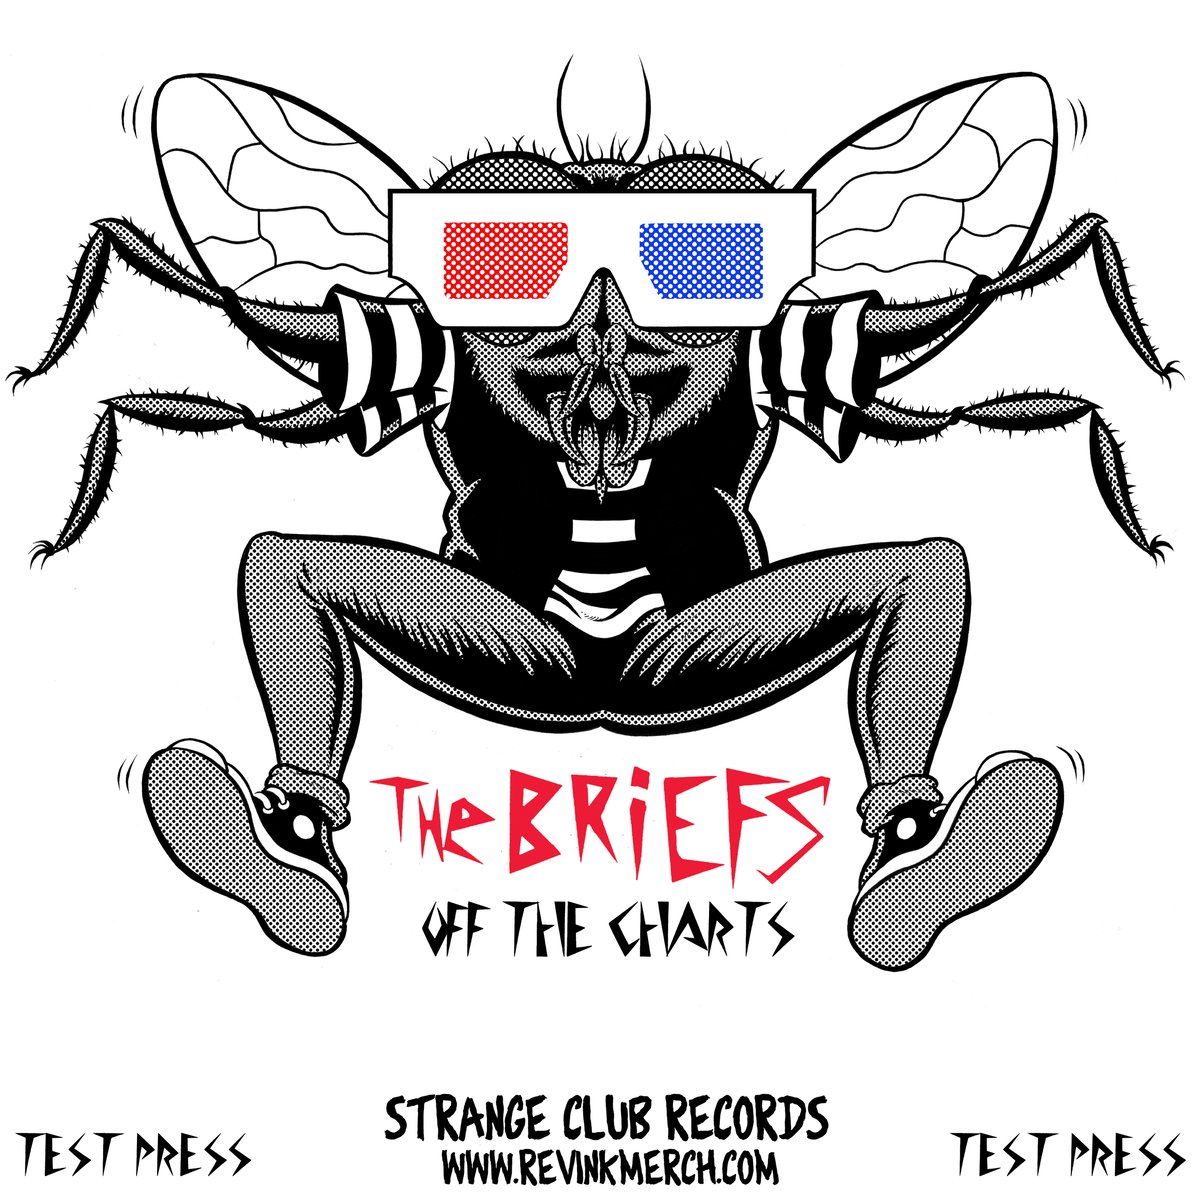 Image of THE BRIEFS OFF THE CHARTS TEST PRESS LP